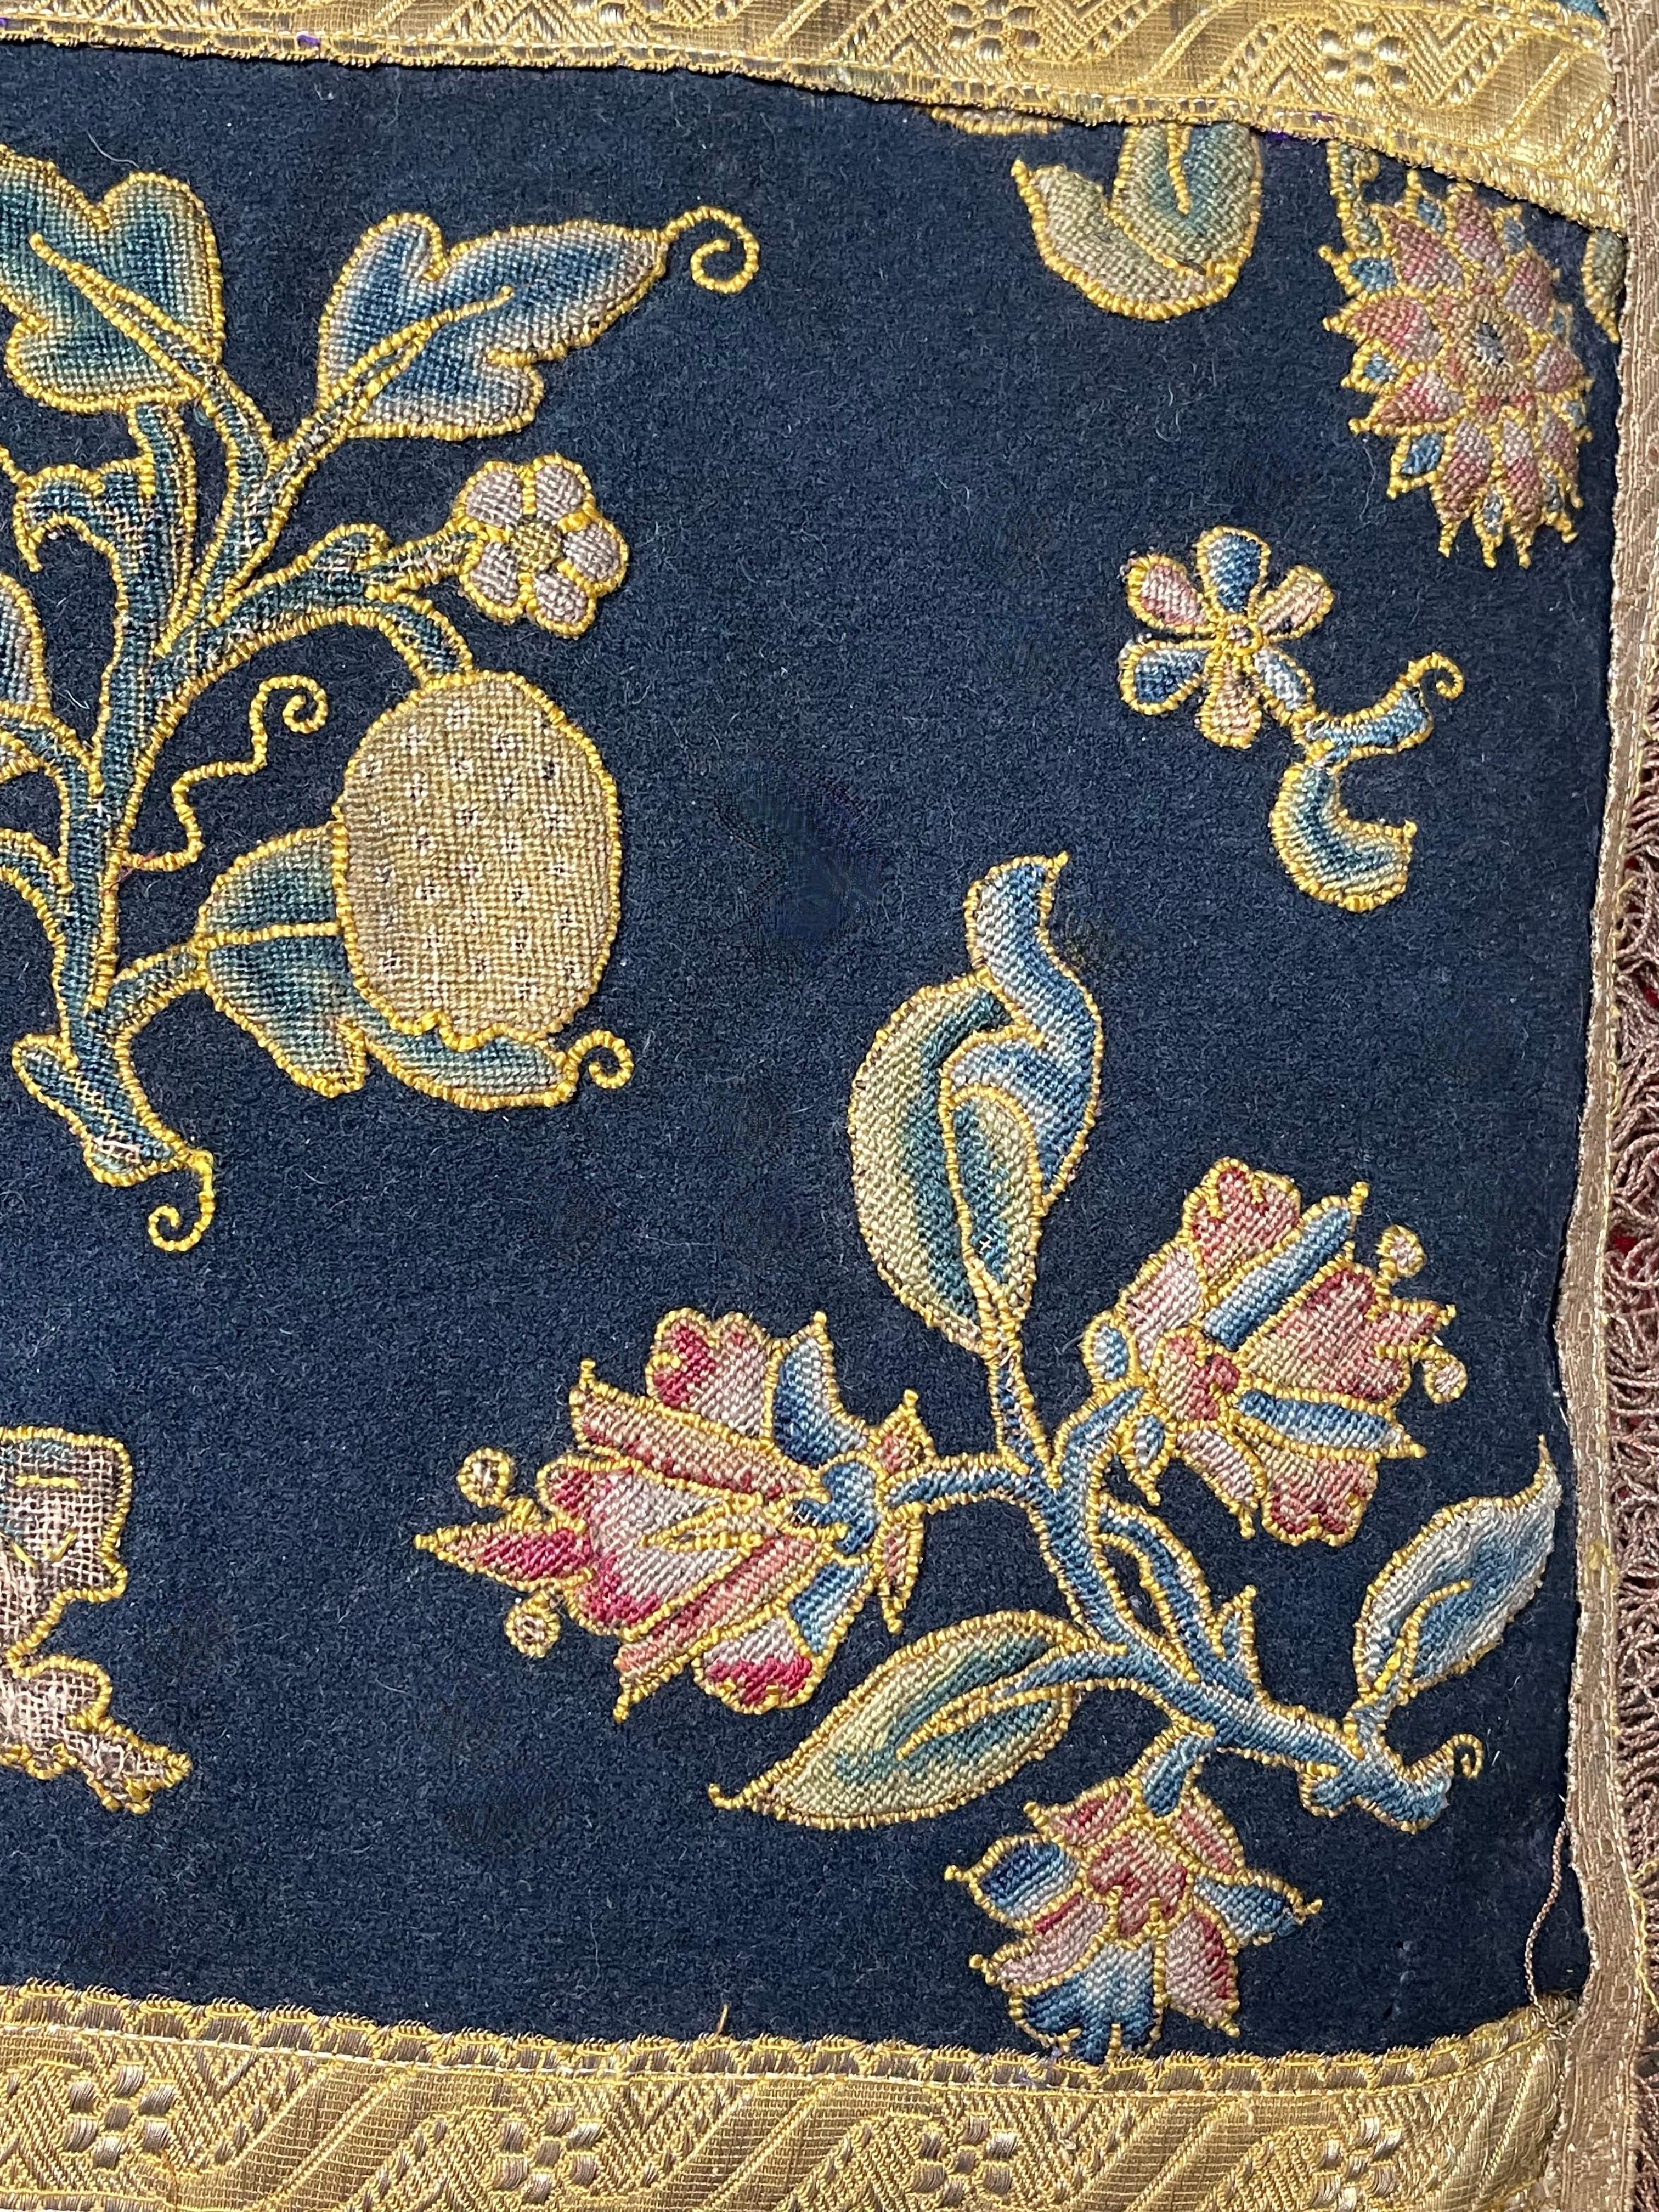 RESERVED FOR S   Antique Pillow 16th Century English Needlework Slips